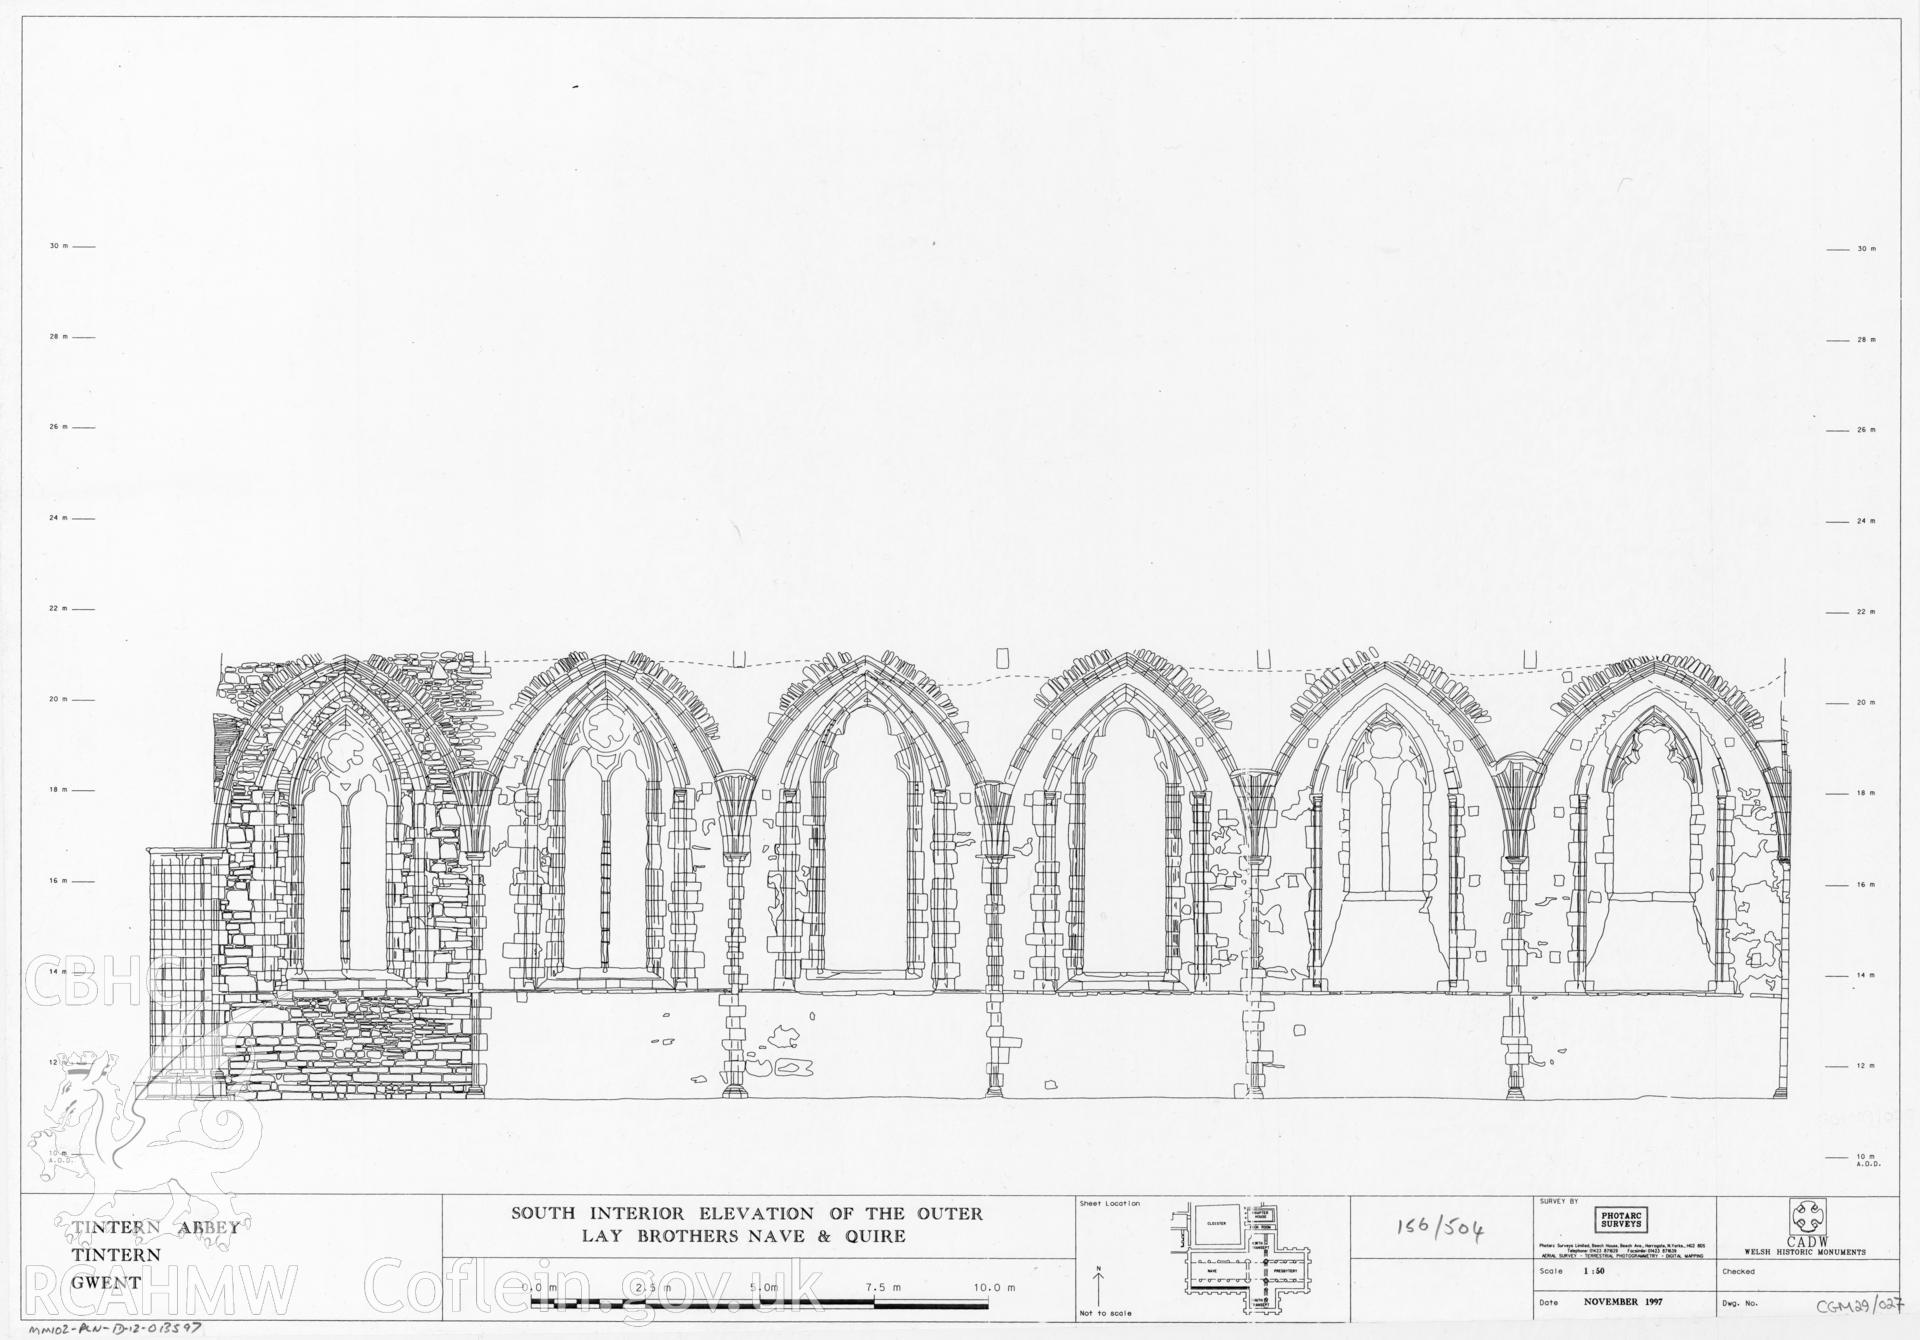 Digital copy of Cadw guardianship monument drawing of Tintern Abbey, south interior elevation of the outer lay brothers nave and quire, dated November 1997.